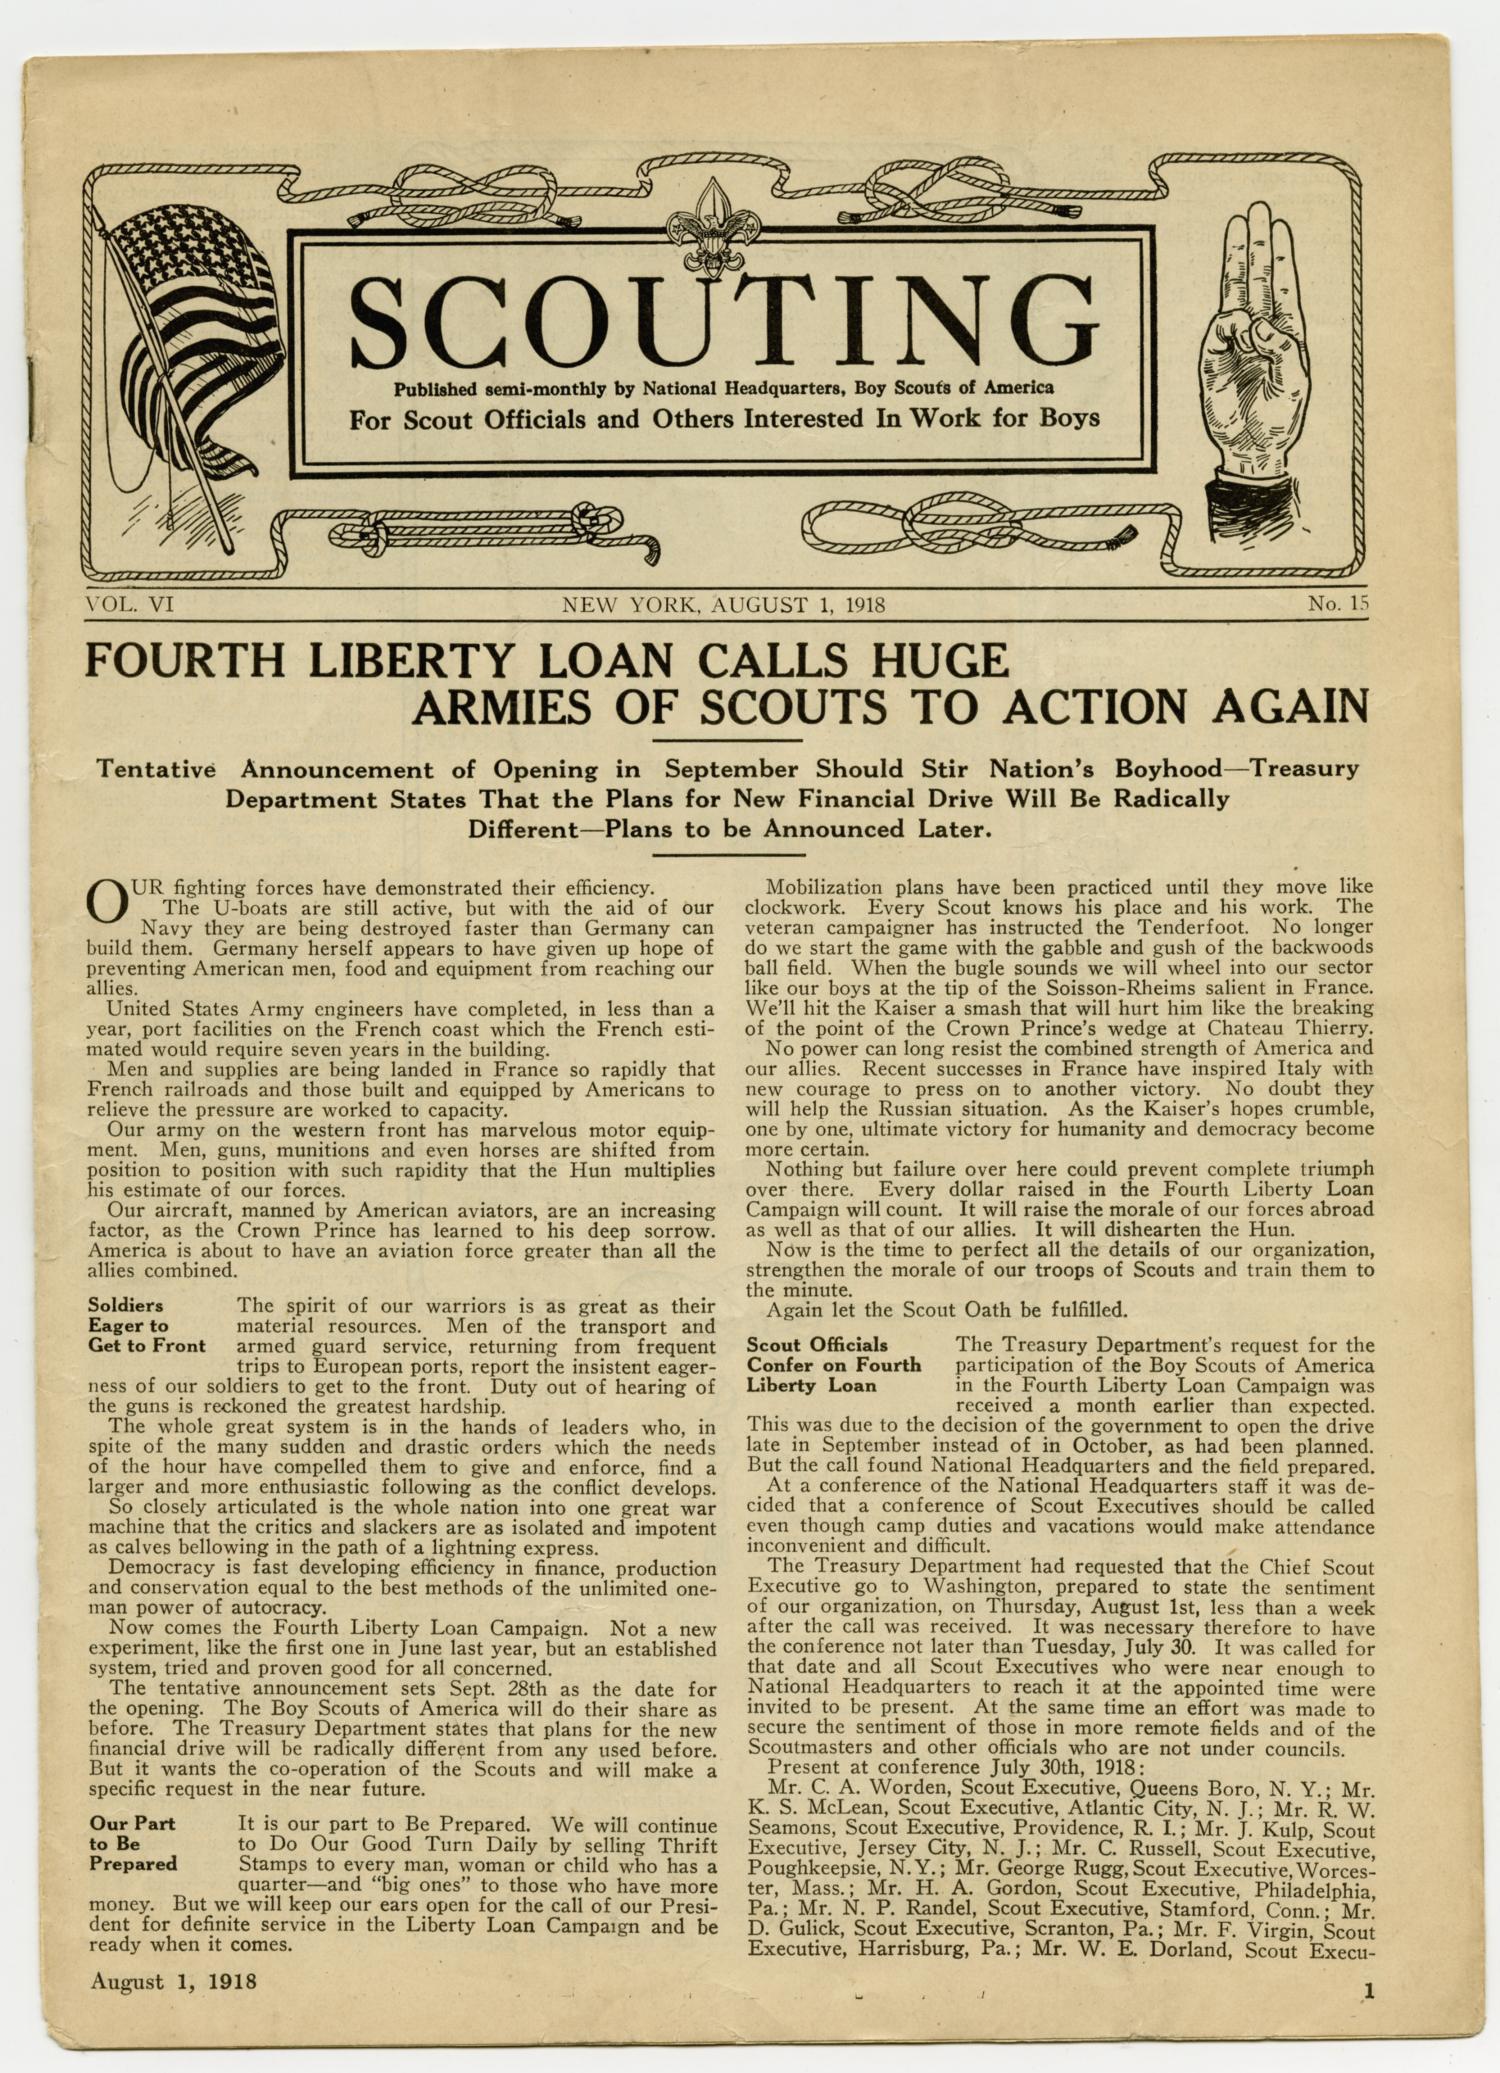 Scouting, Volume 6, Number 15, August 1, 1918
                                                
                                                    1
                                                